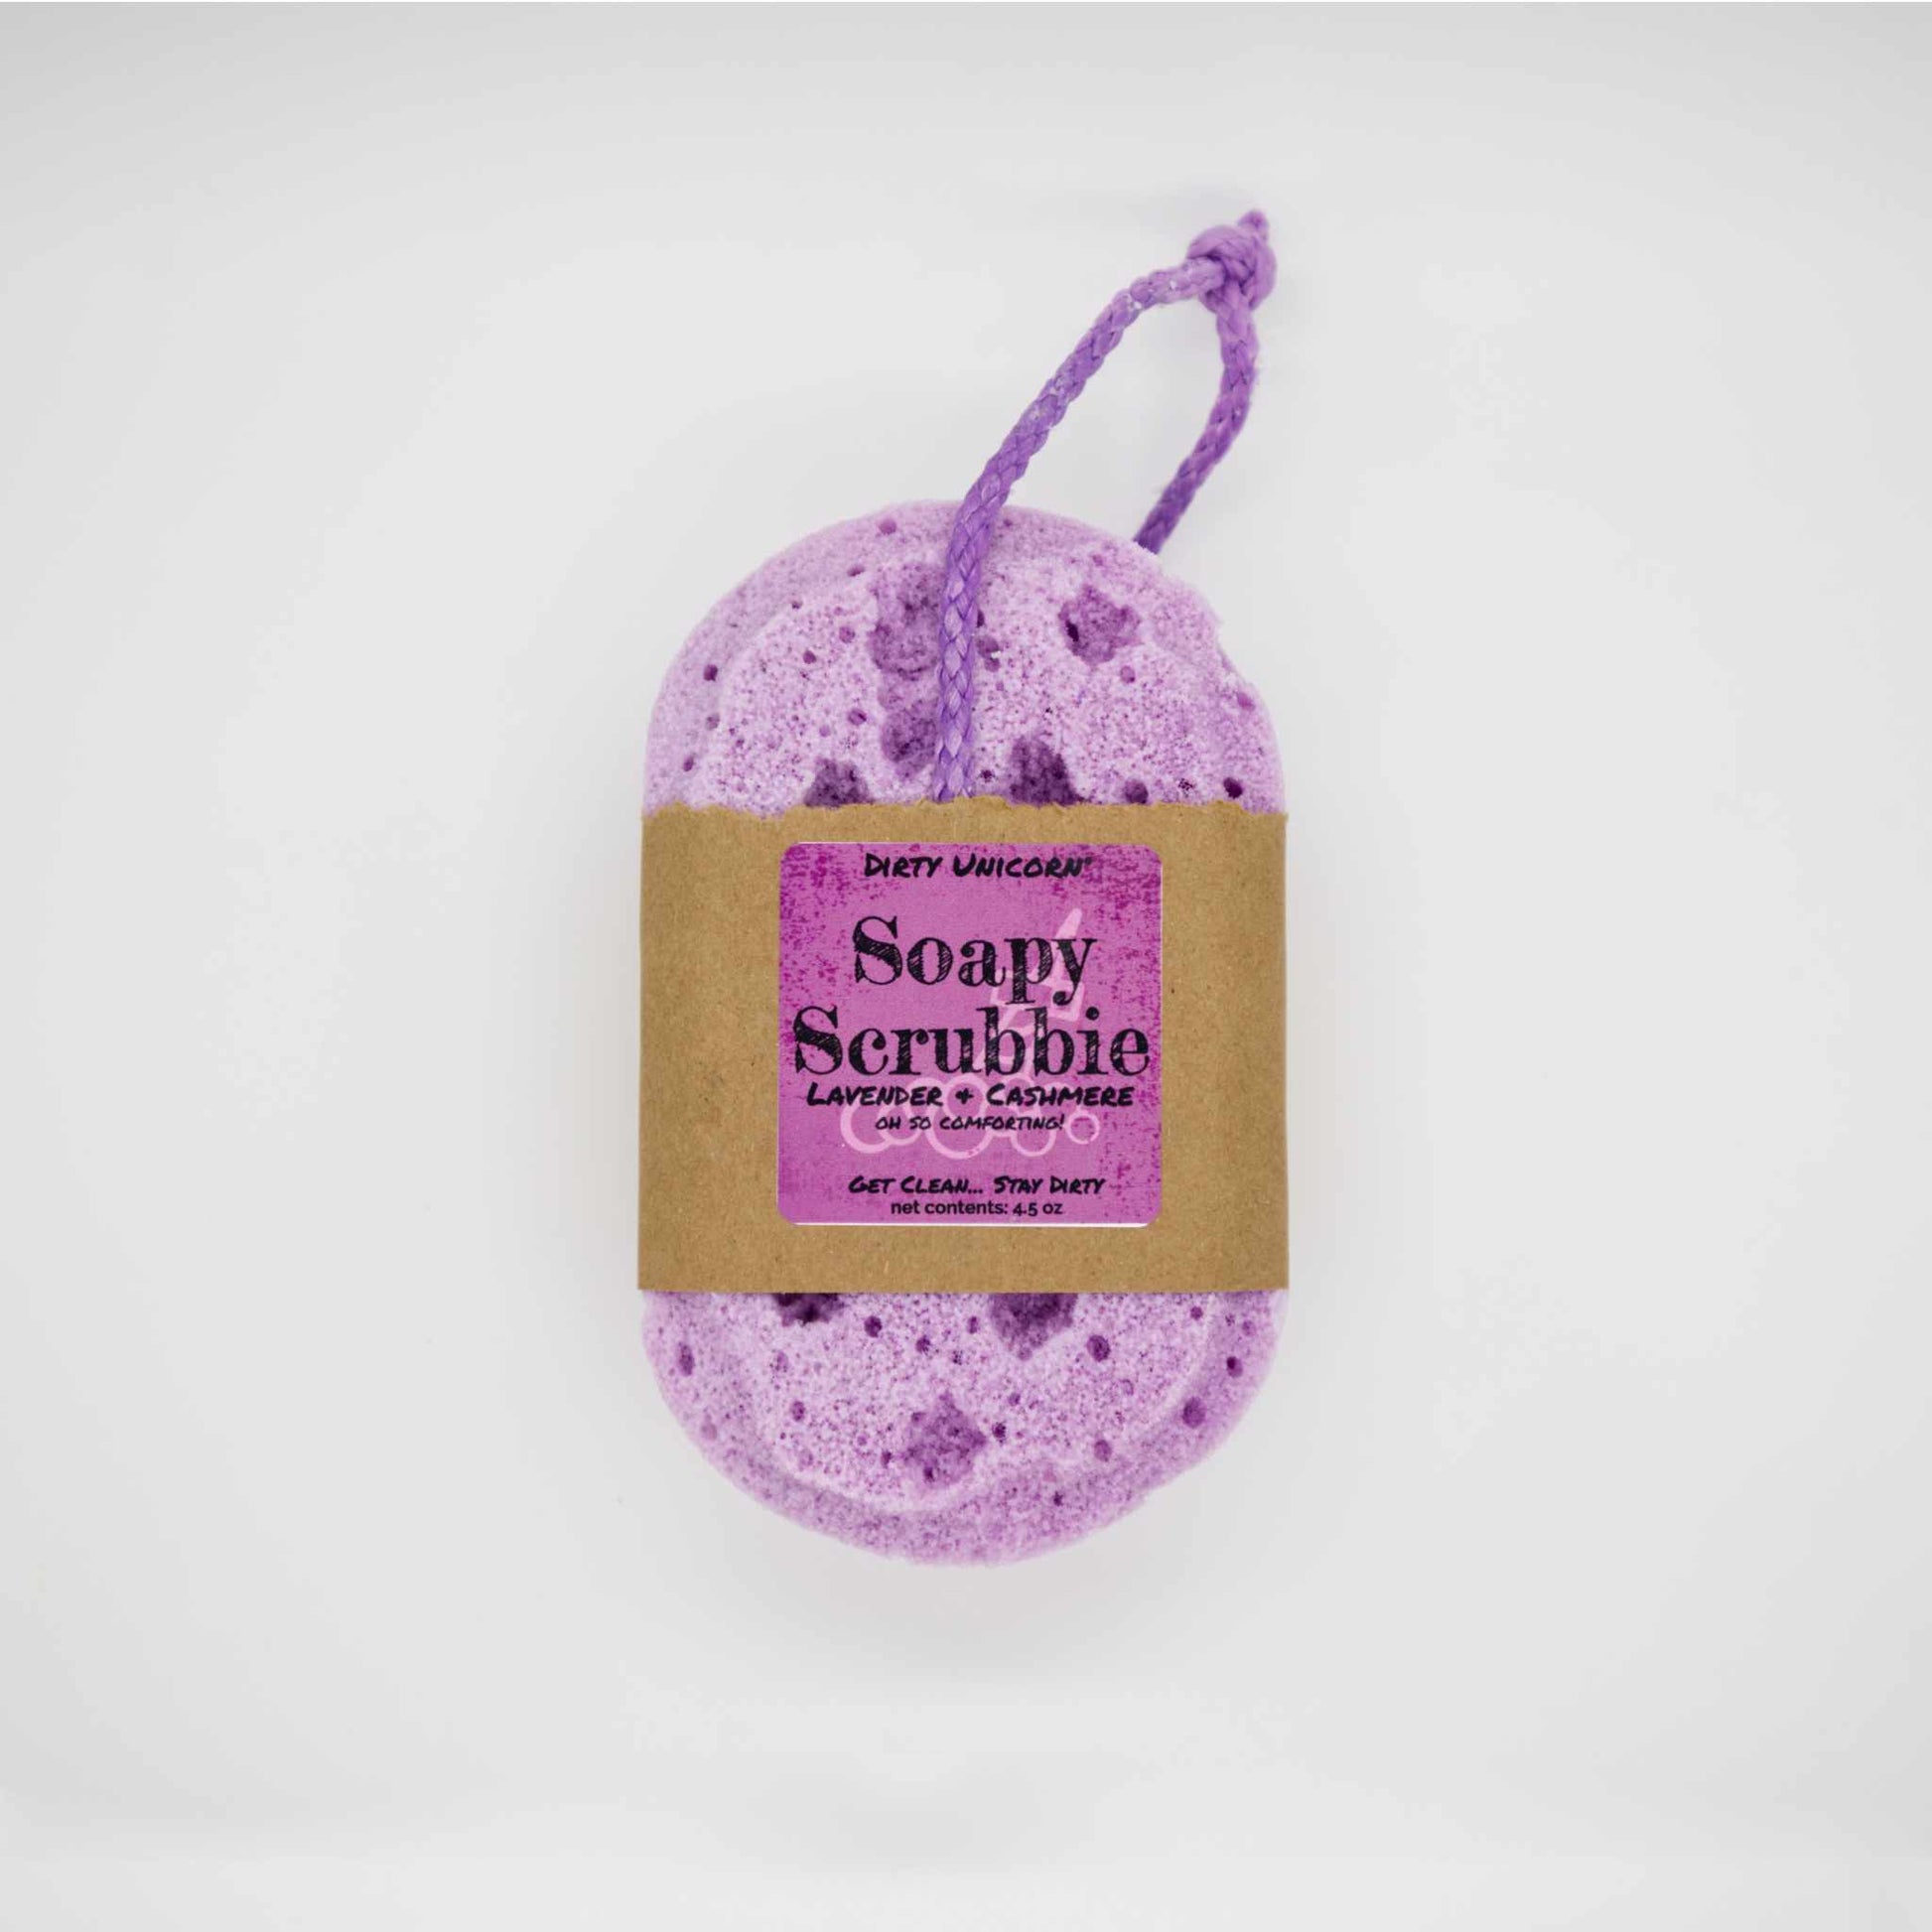 Light purple bath sponge with coordinating rope for hanging. on blank white background. Sponge is wrapped in brown Kraft paper belly band with a purple label barring product title